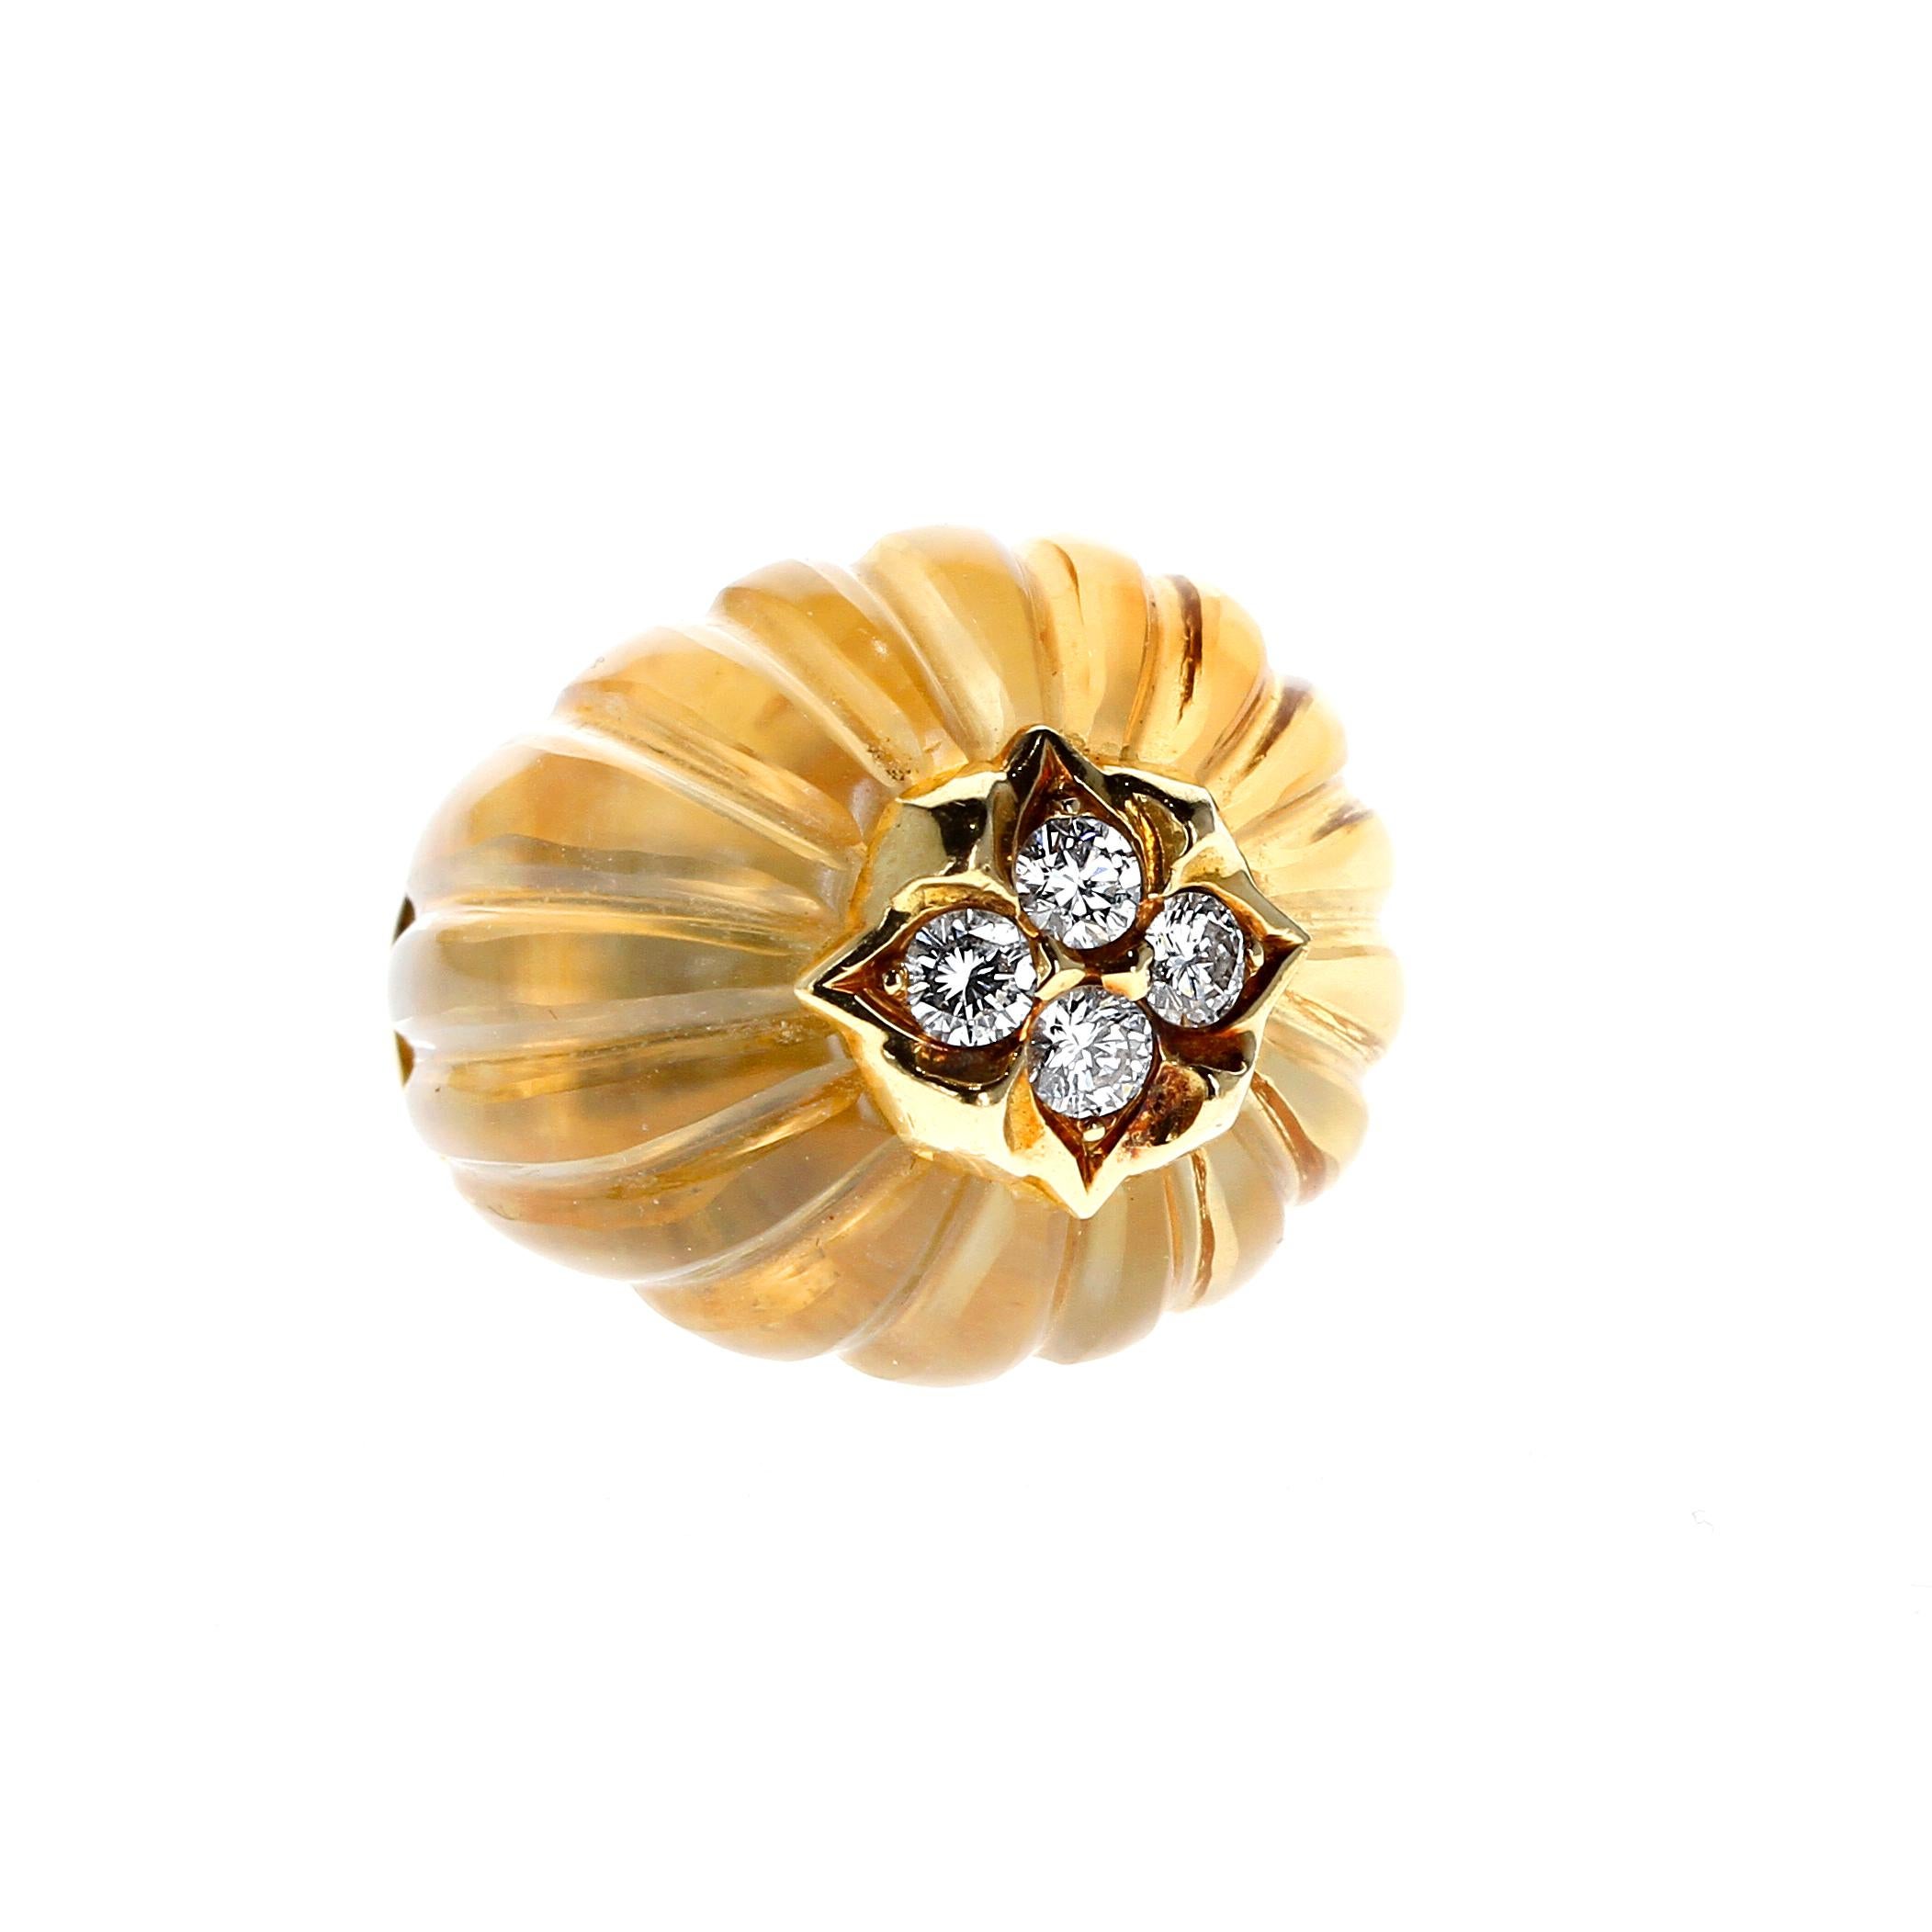 A masterfully hand-crafted ring, set with a fluted tapered citrine cabochon centered with a floral motif encrusted with four round brilliant-cut diamonds. The ring is stamped with marker's marks and French assay marks; size 6 US with ring guard